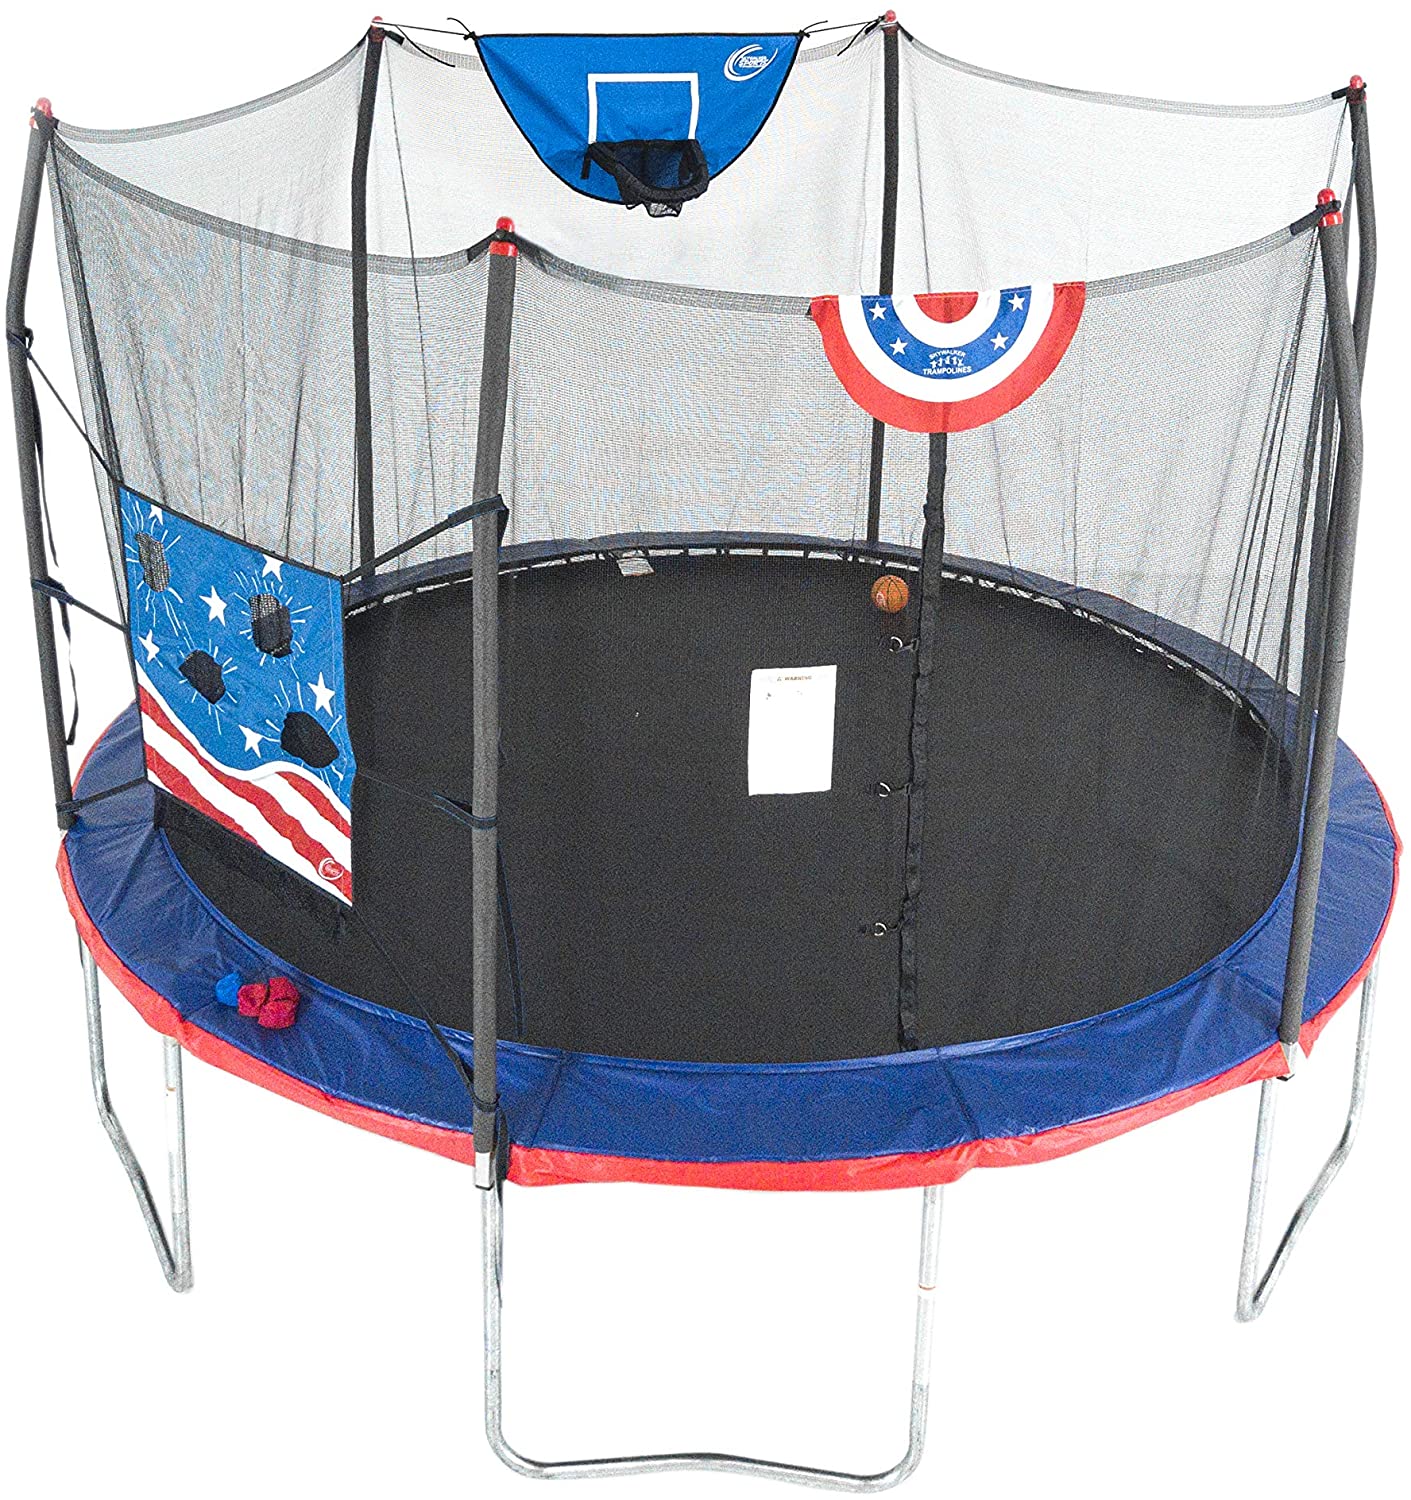 8' Skywalker Jump N’ Dunk Trampoline w/ Safety Enclosure And Basketball Hoop $98.40 + Free Shipping